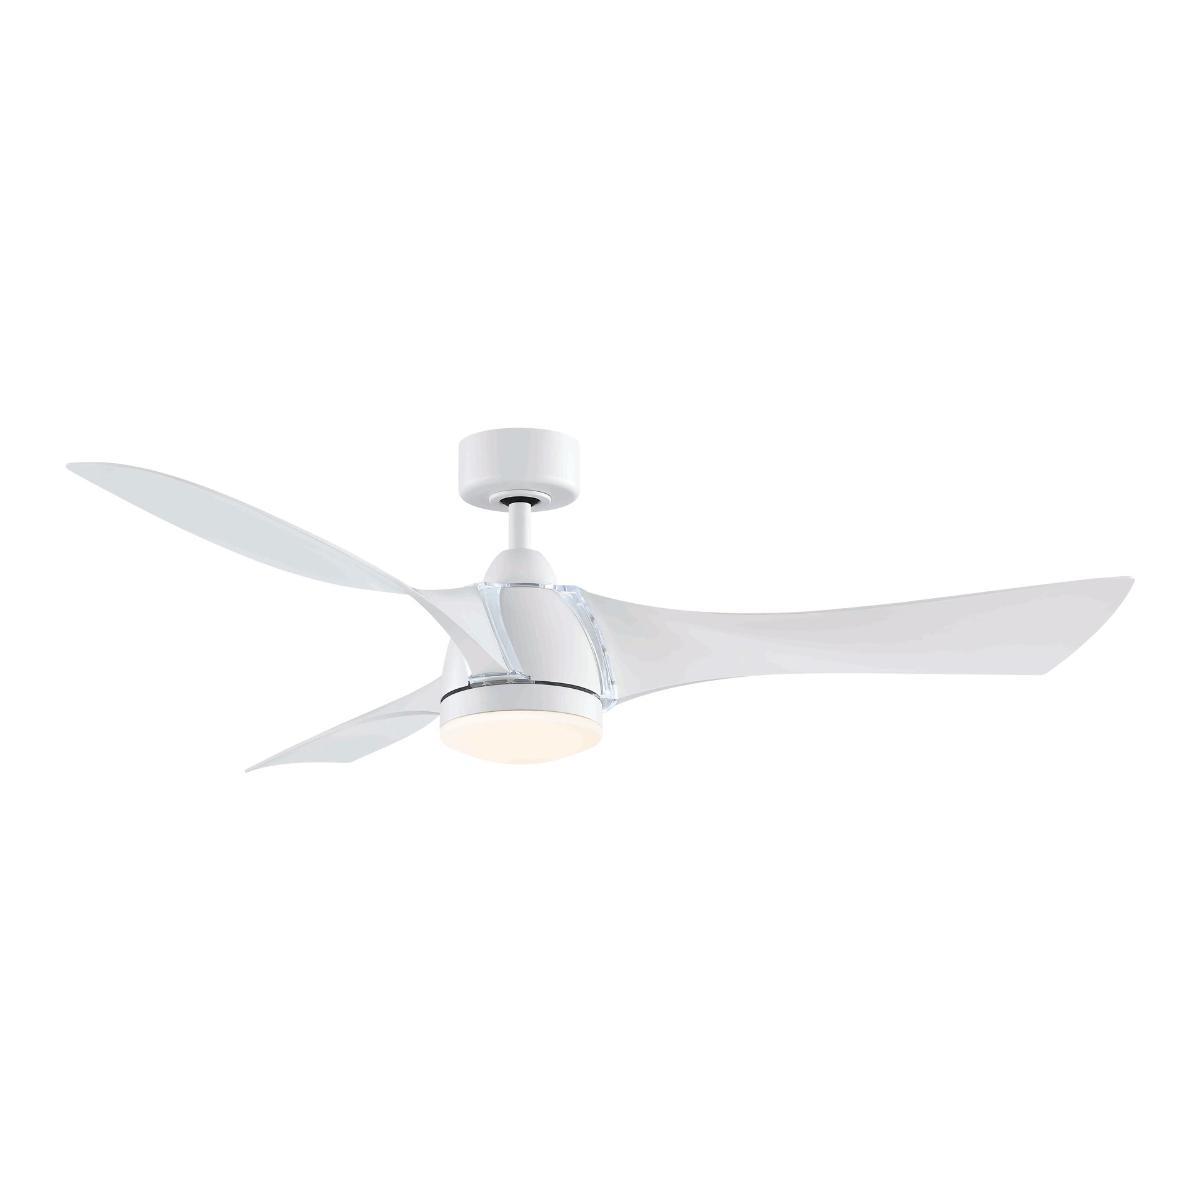 Klear 56 inch Indoor/Outdoor Ceiling Fan with LED CCT Select Light Kit and Remote, Matte White Finish - Bees Lighting